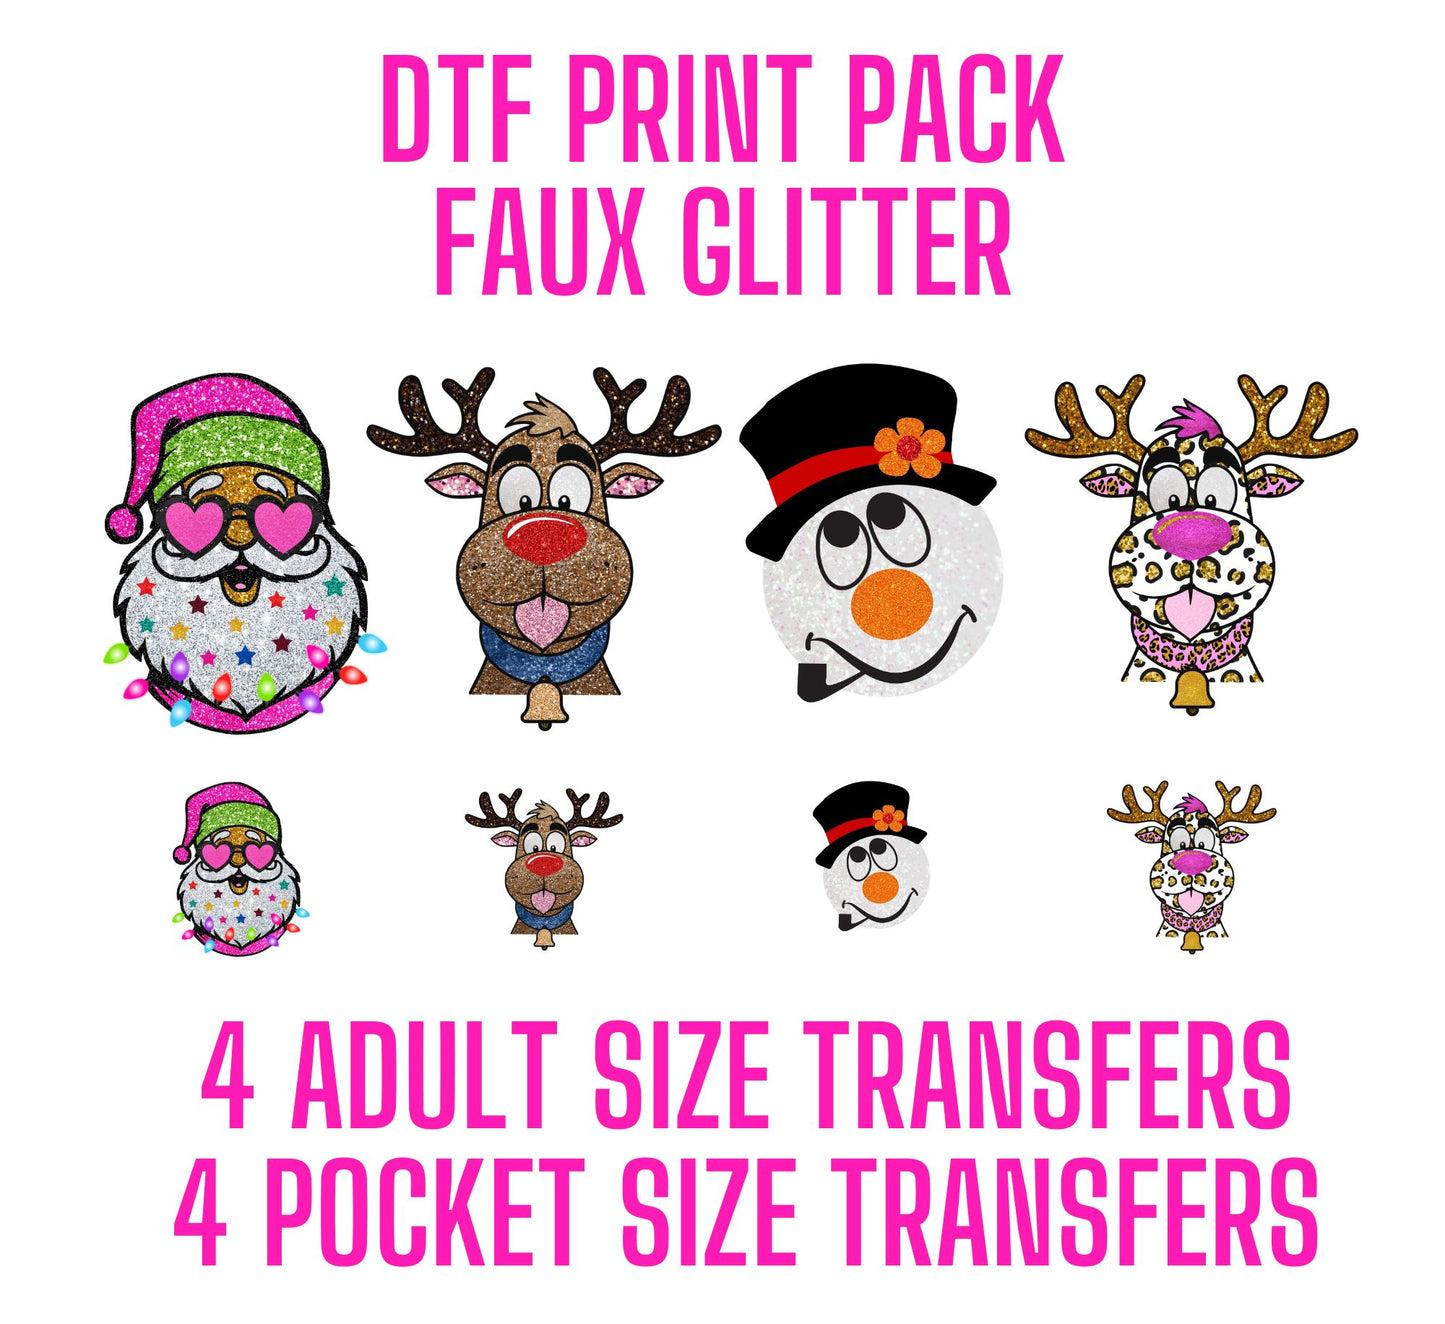 DTF Print Pack: Faux Glitter Christmas